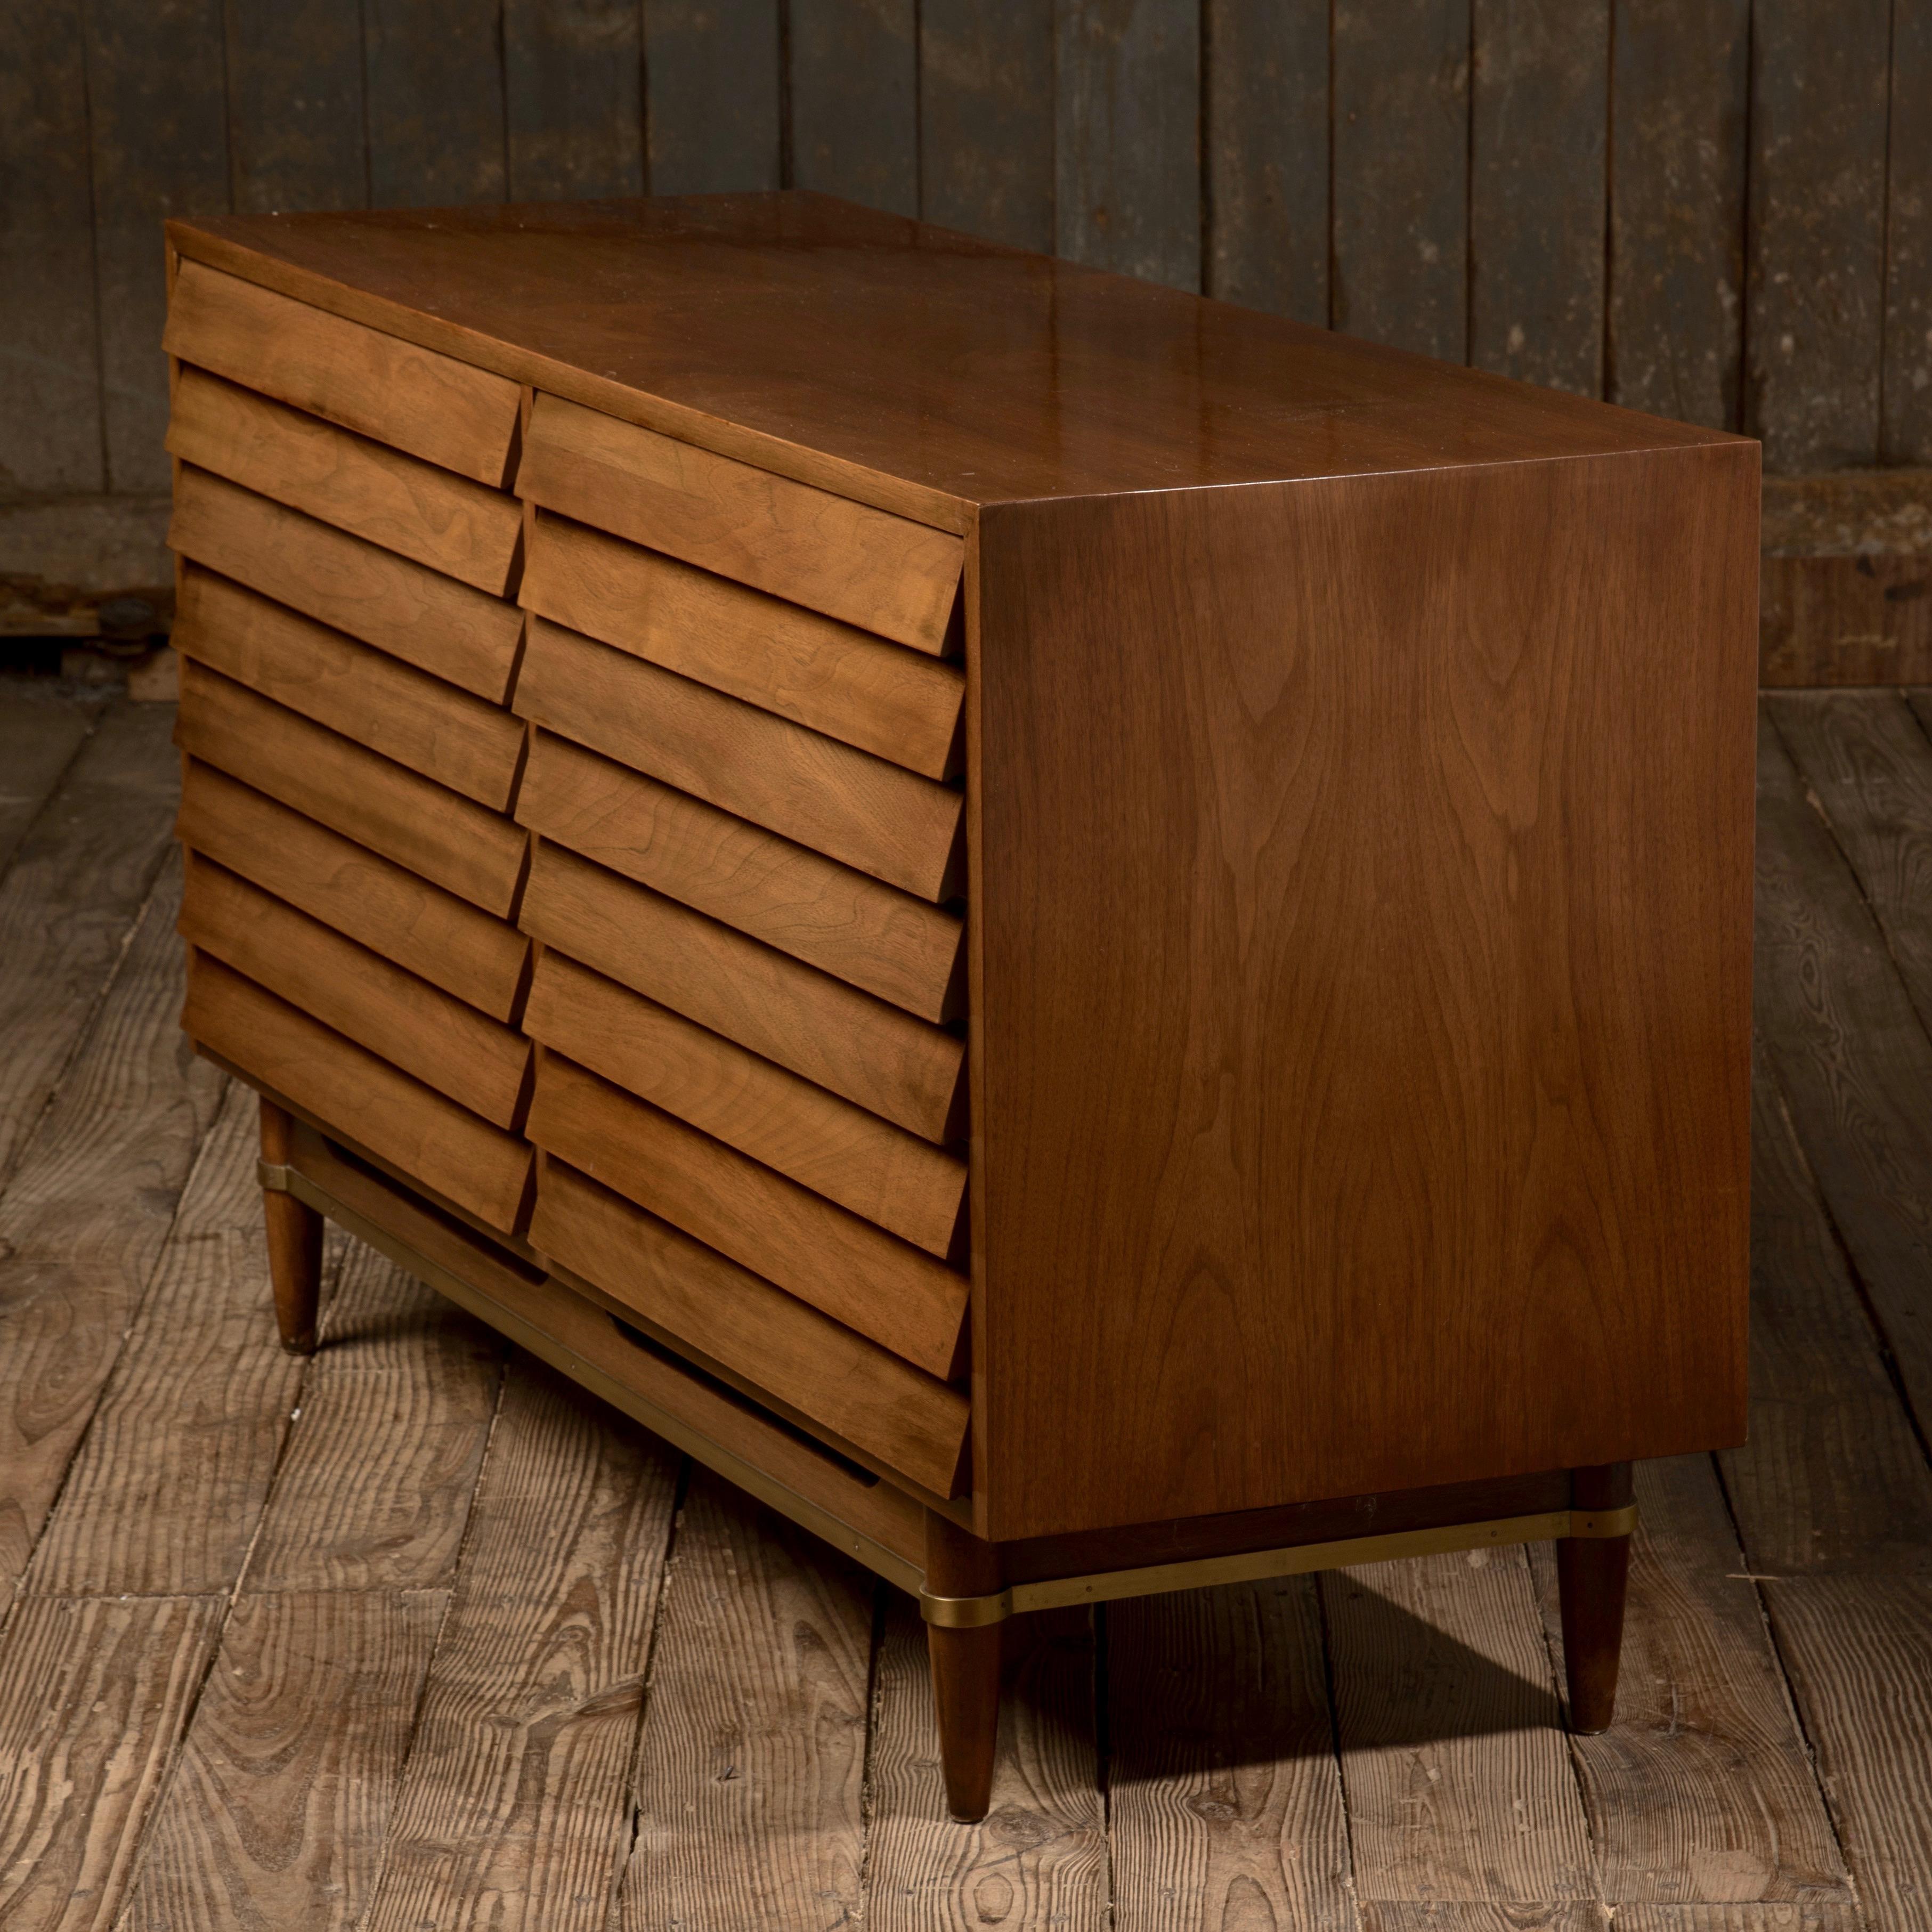 Very sophisticated dresser, chest of drawers or credenza by Mid-Century Modern designer Merton L. Gershun for American of Martinsville's Dania line, having stunning walnut louvre front with six dovetailed drawers.